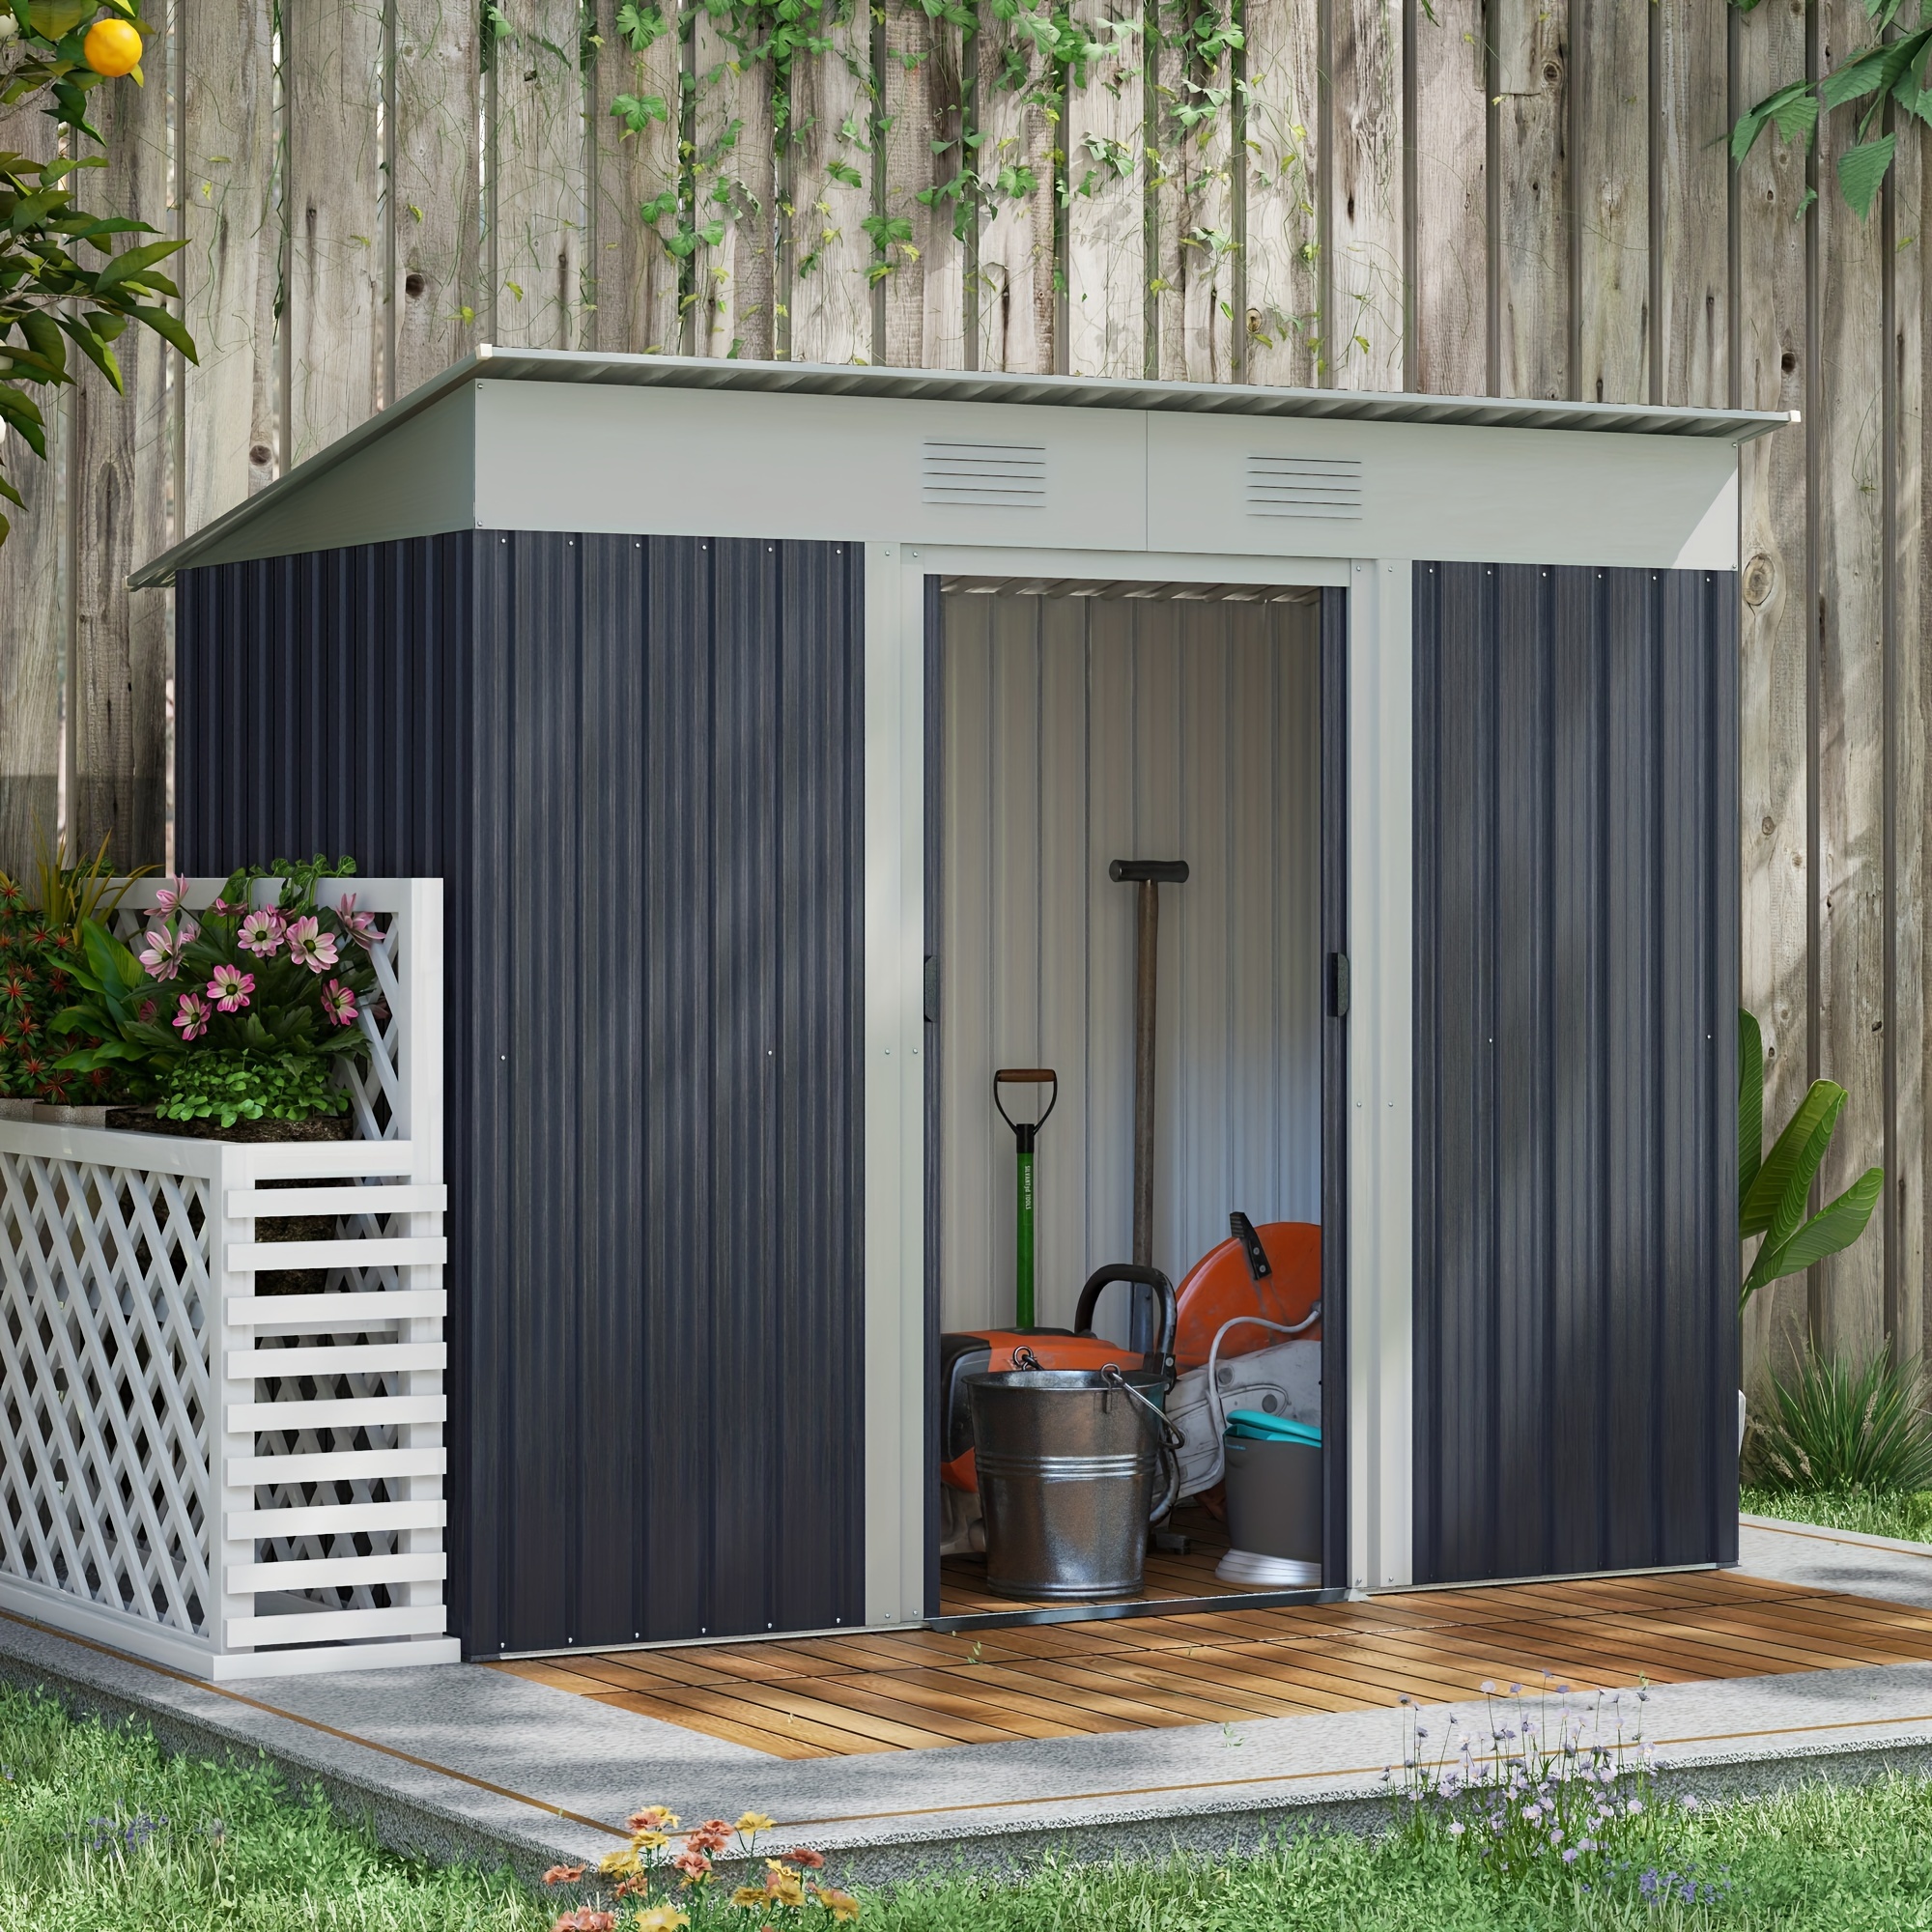 

Outsunny 7' X 4' Metal Lean To Garden Shed, Outdoor Storage Shed, Garden With Double Sliding Doors, 2 Air Vents For Backyard, Patio, Lawn, Gray